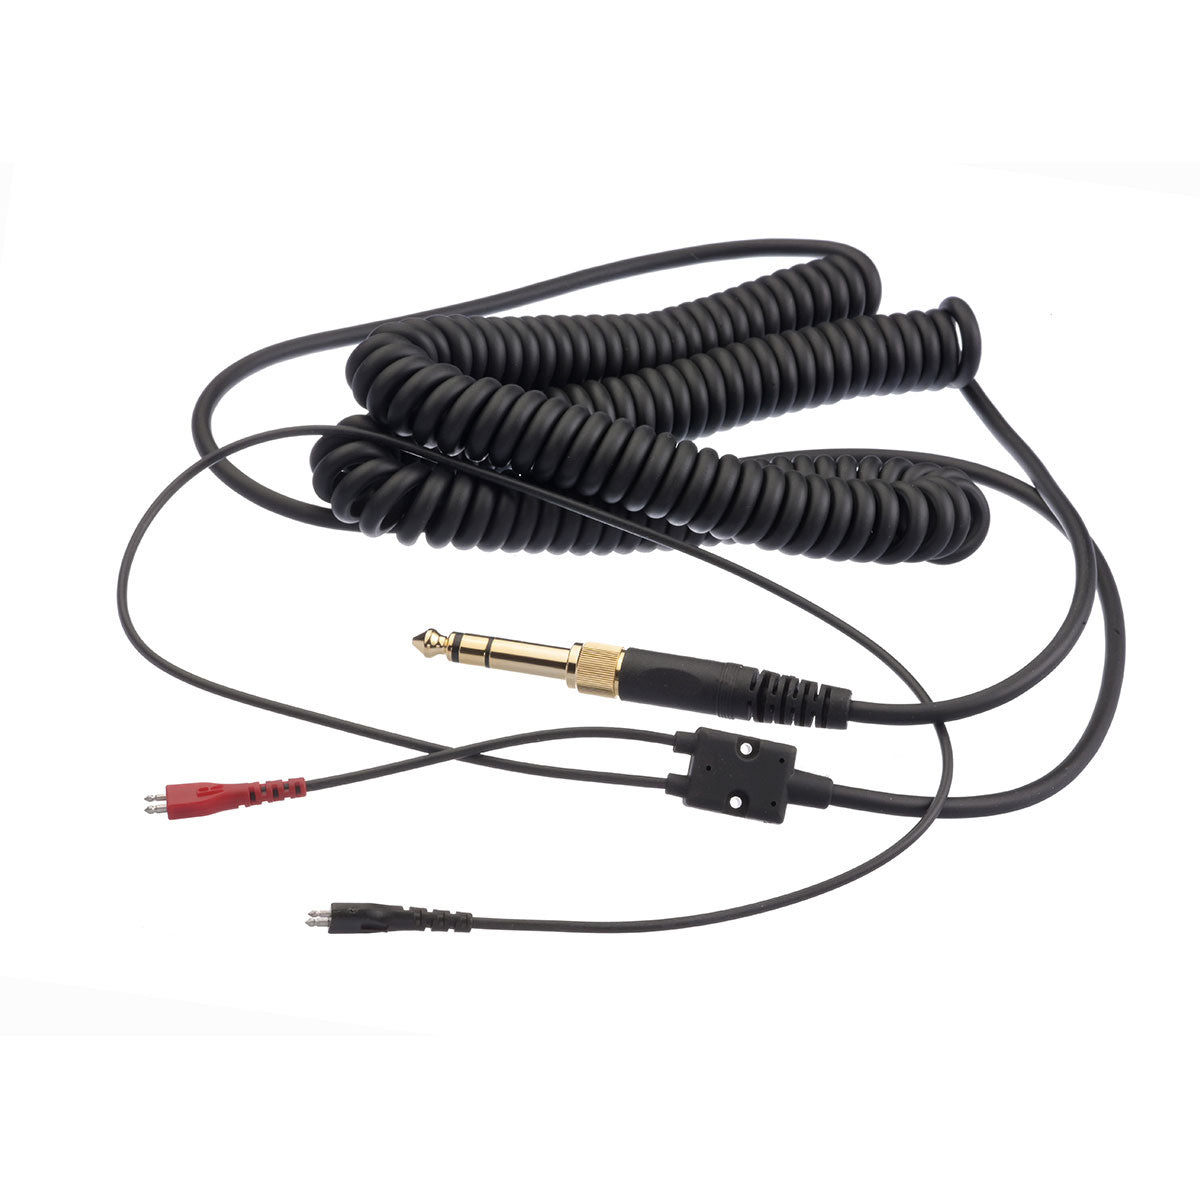 Sennheiser Spares - Coiled Cable with Line Plug with Adapter, For HD 25